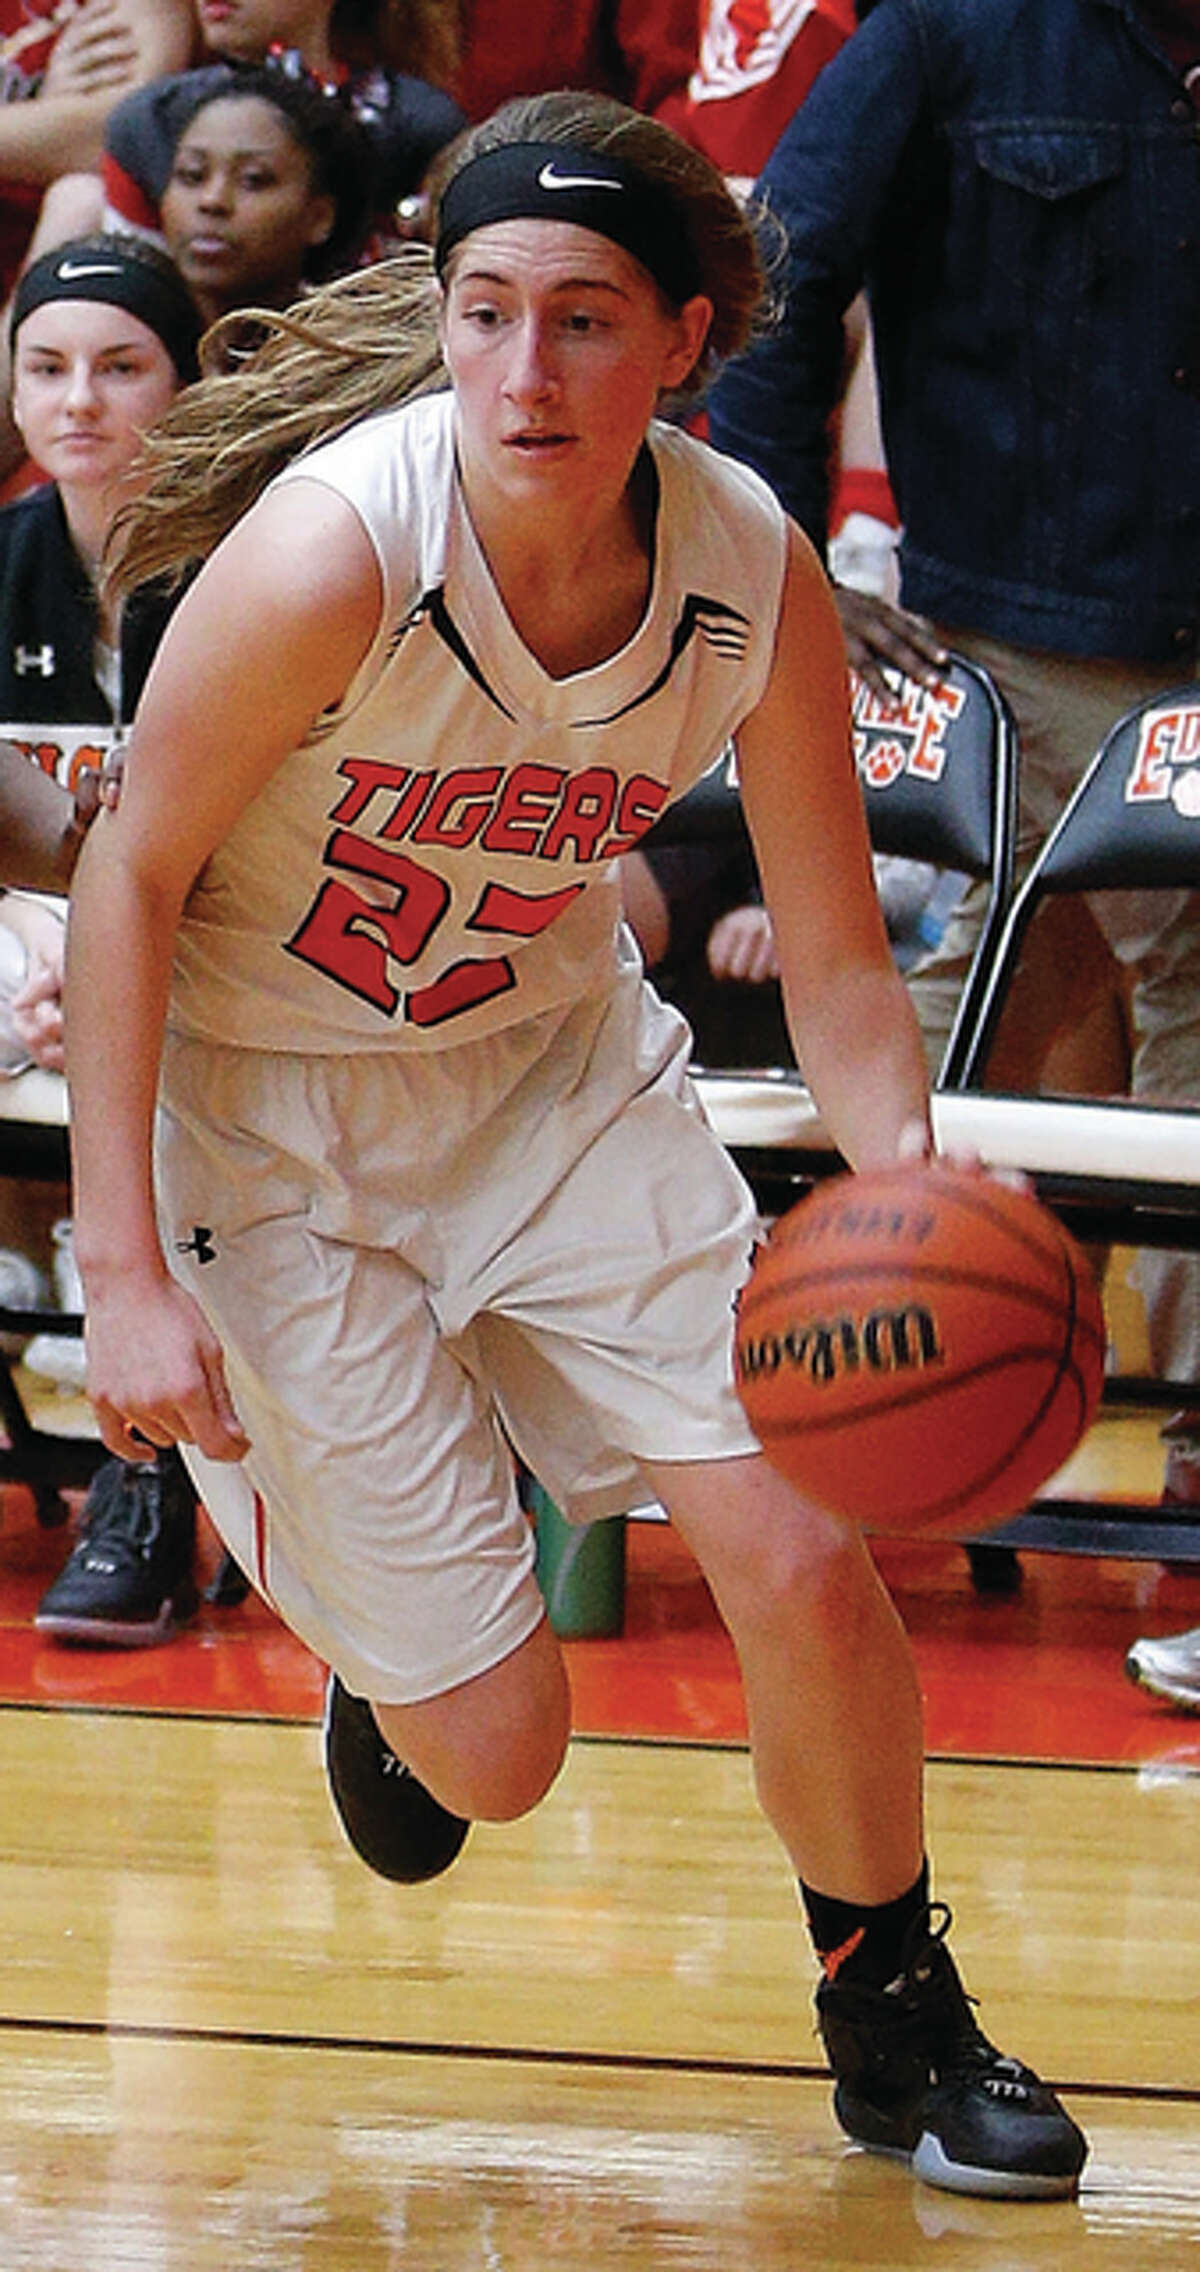 Edwardsville sophomore Kate Martin got her 500th career point while scoring a career-high 29 points Monday night in the Tigers’ 72-52 victory over St. Joseph’s Academy in St. Louis.